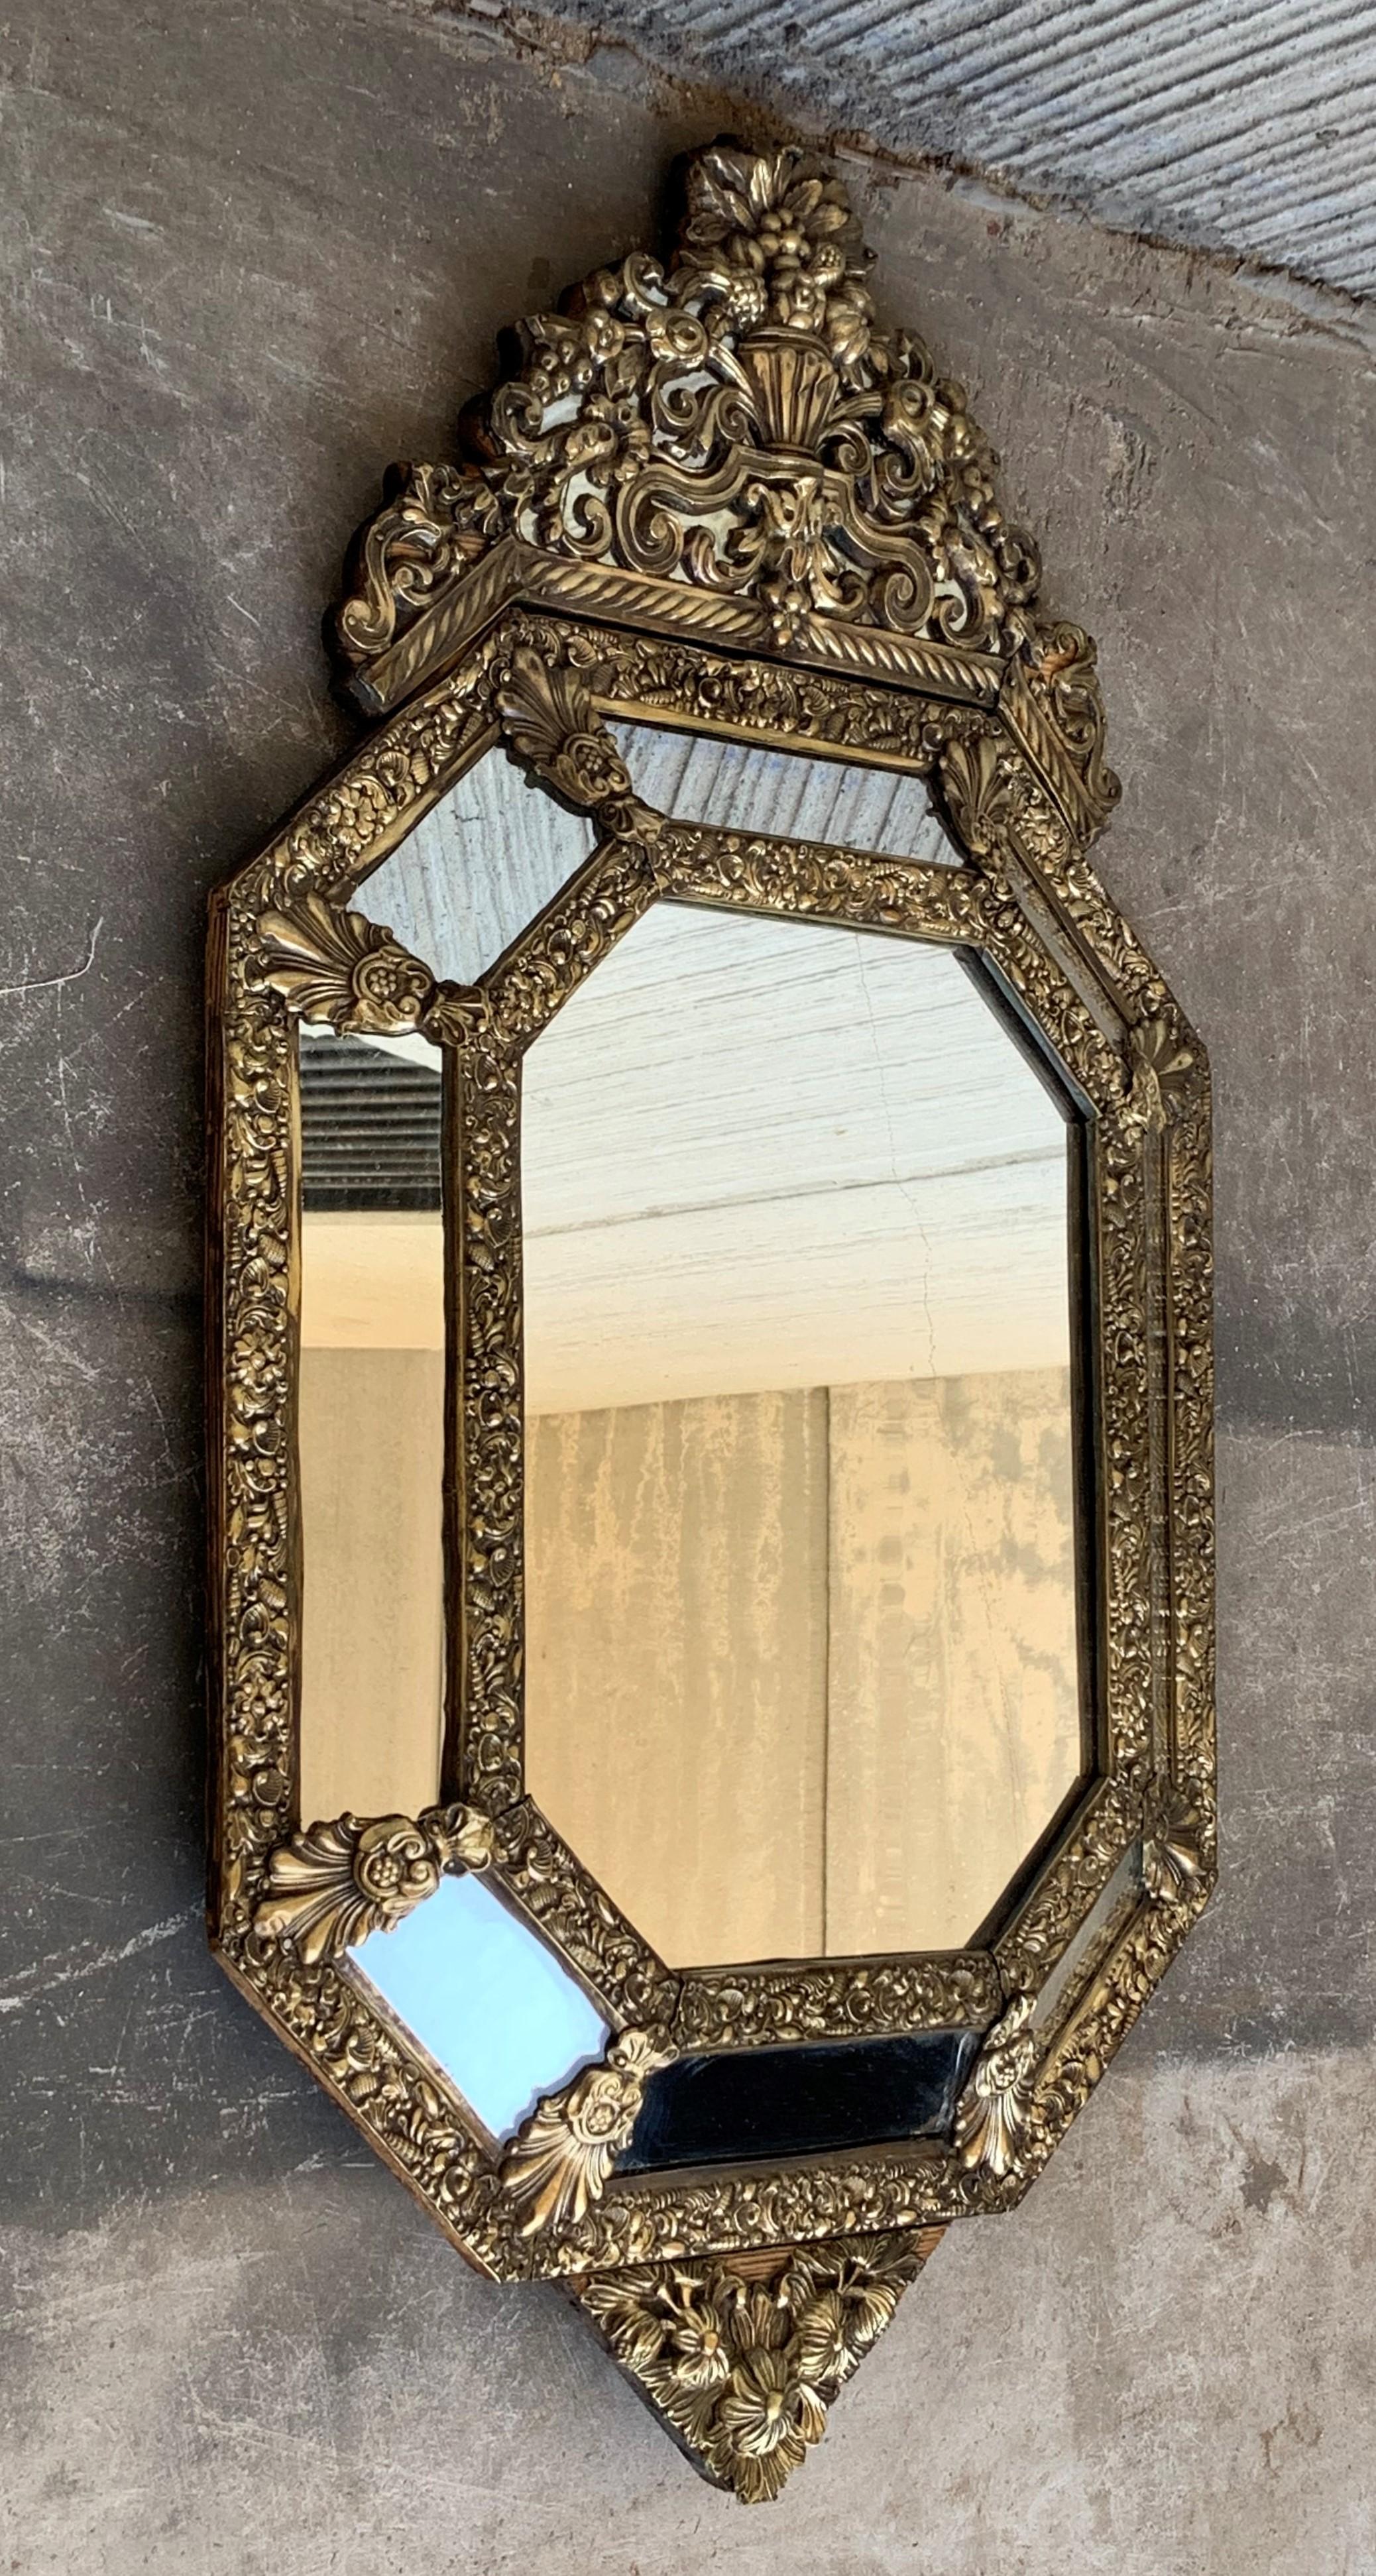 19th Century French Repousse Hexagonal Brass Relief Wall Mirror with Crest In Good Condition For Sale In Miami, FL